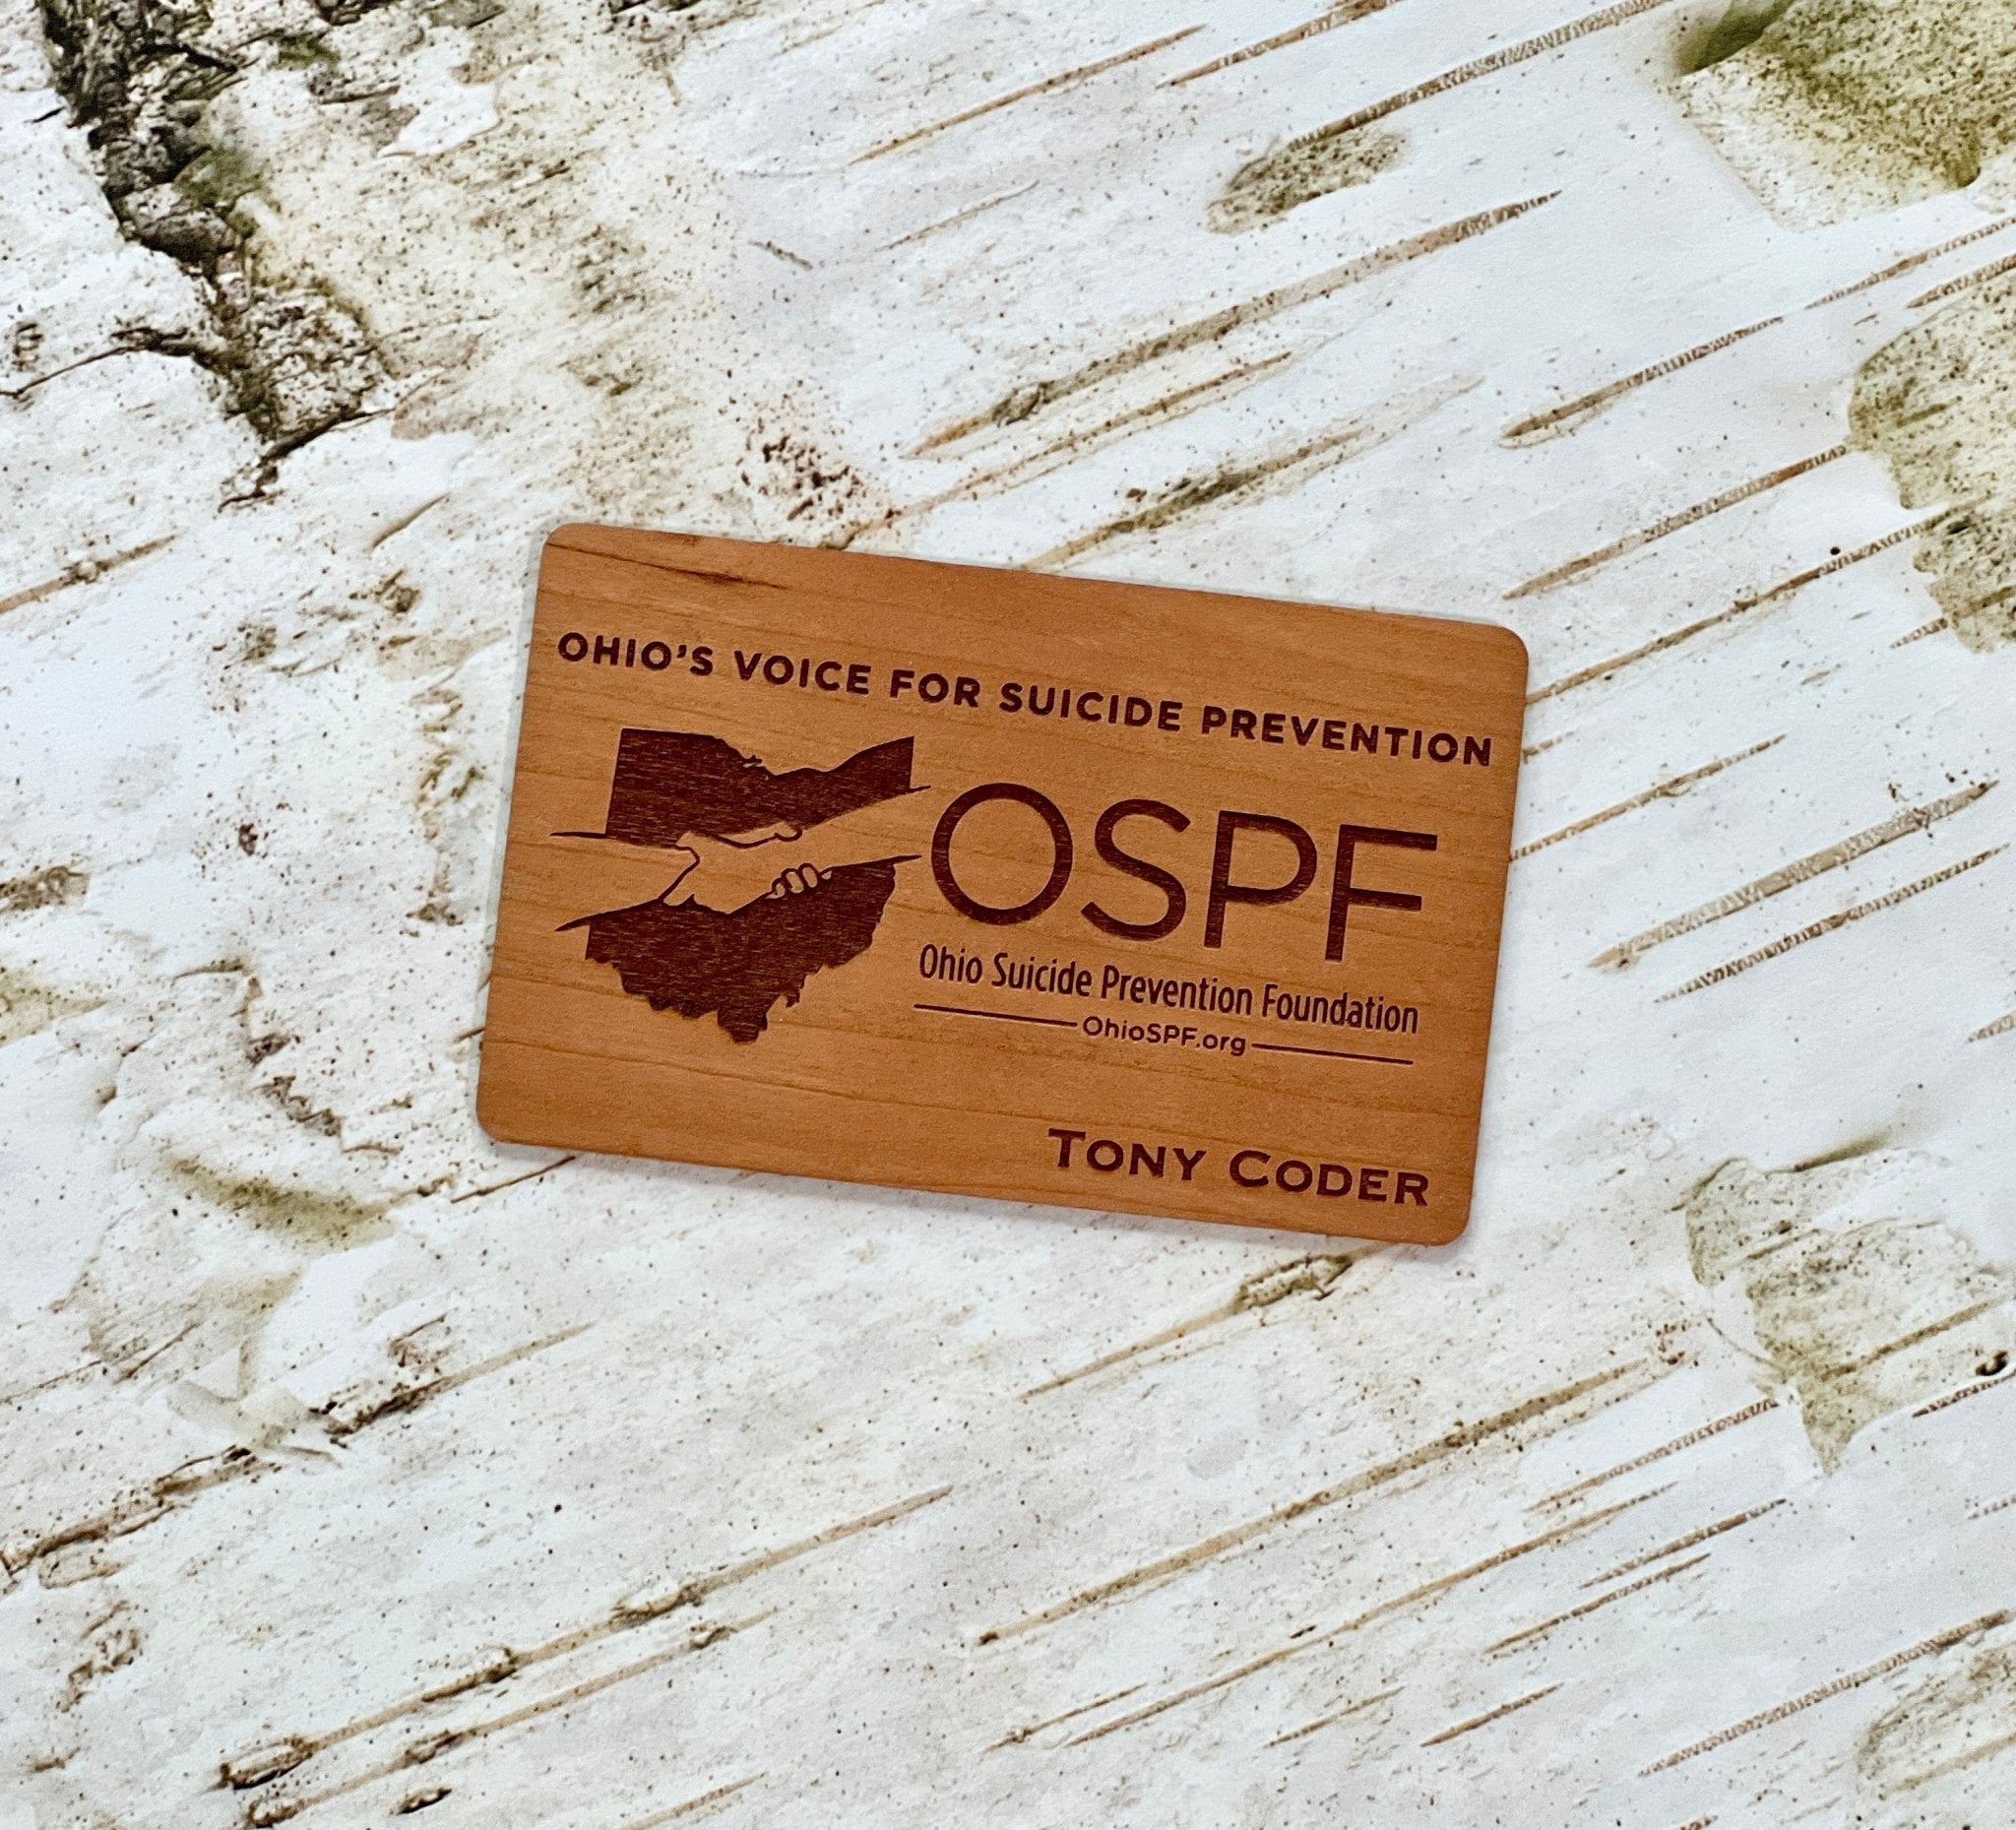 Sustainable Cherry - NFC Business card - Tap Tag